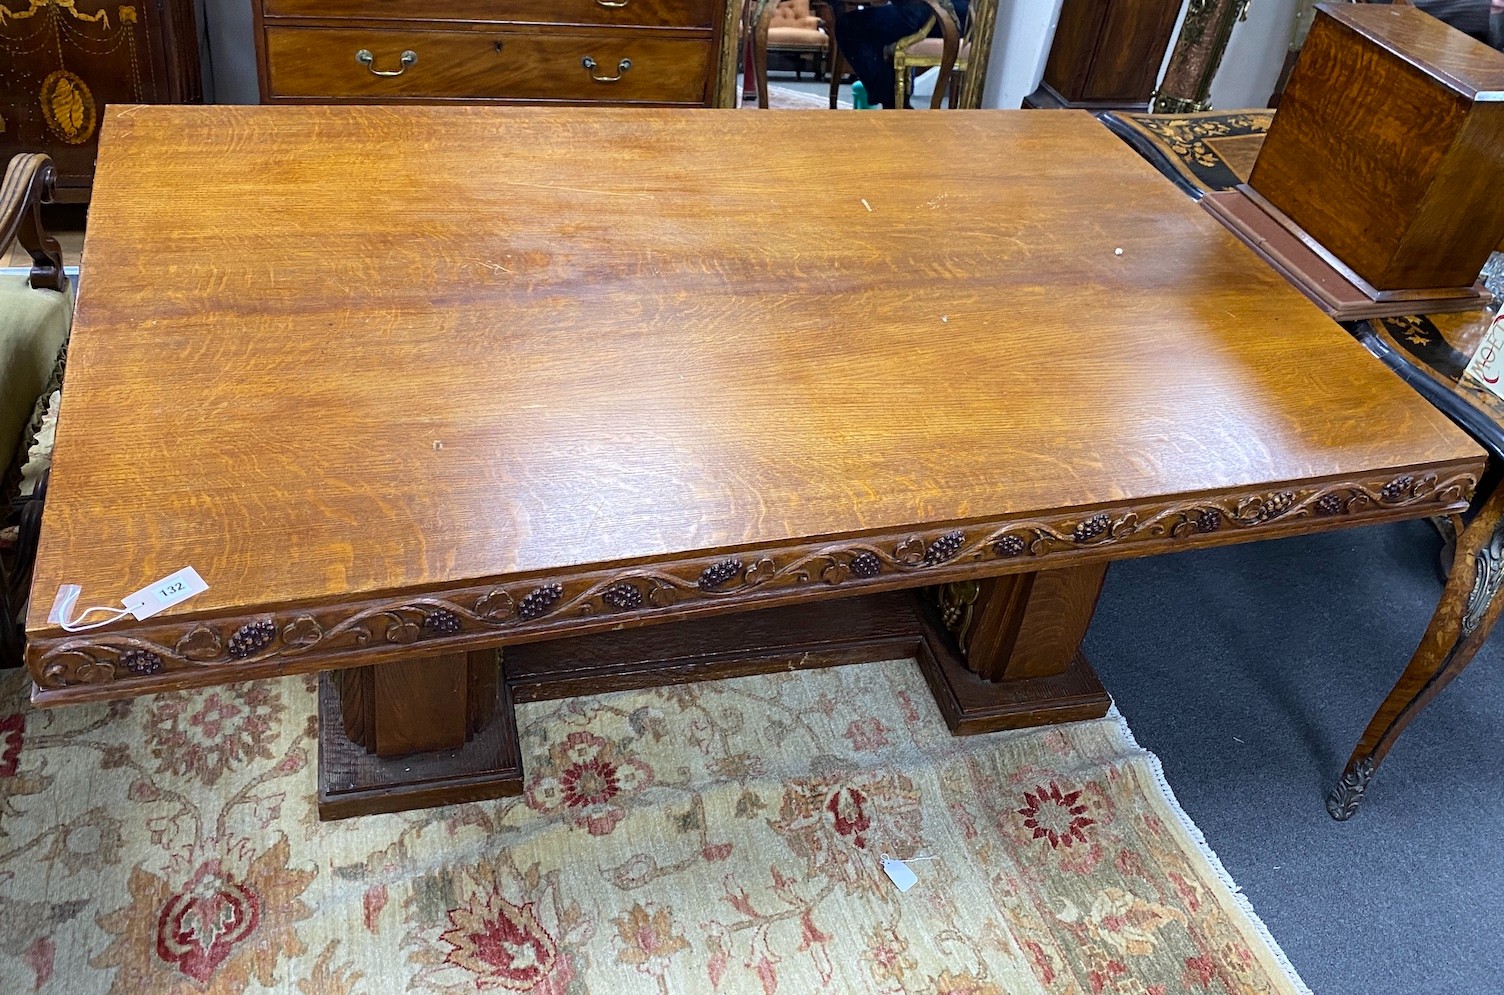 An early 20th century gilt bronze mounted rectangular oak dining table with carved fruiting vine decoration, width 180cm, depth 113cm, height 75cm